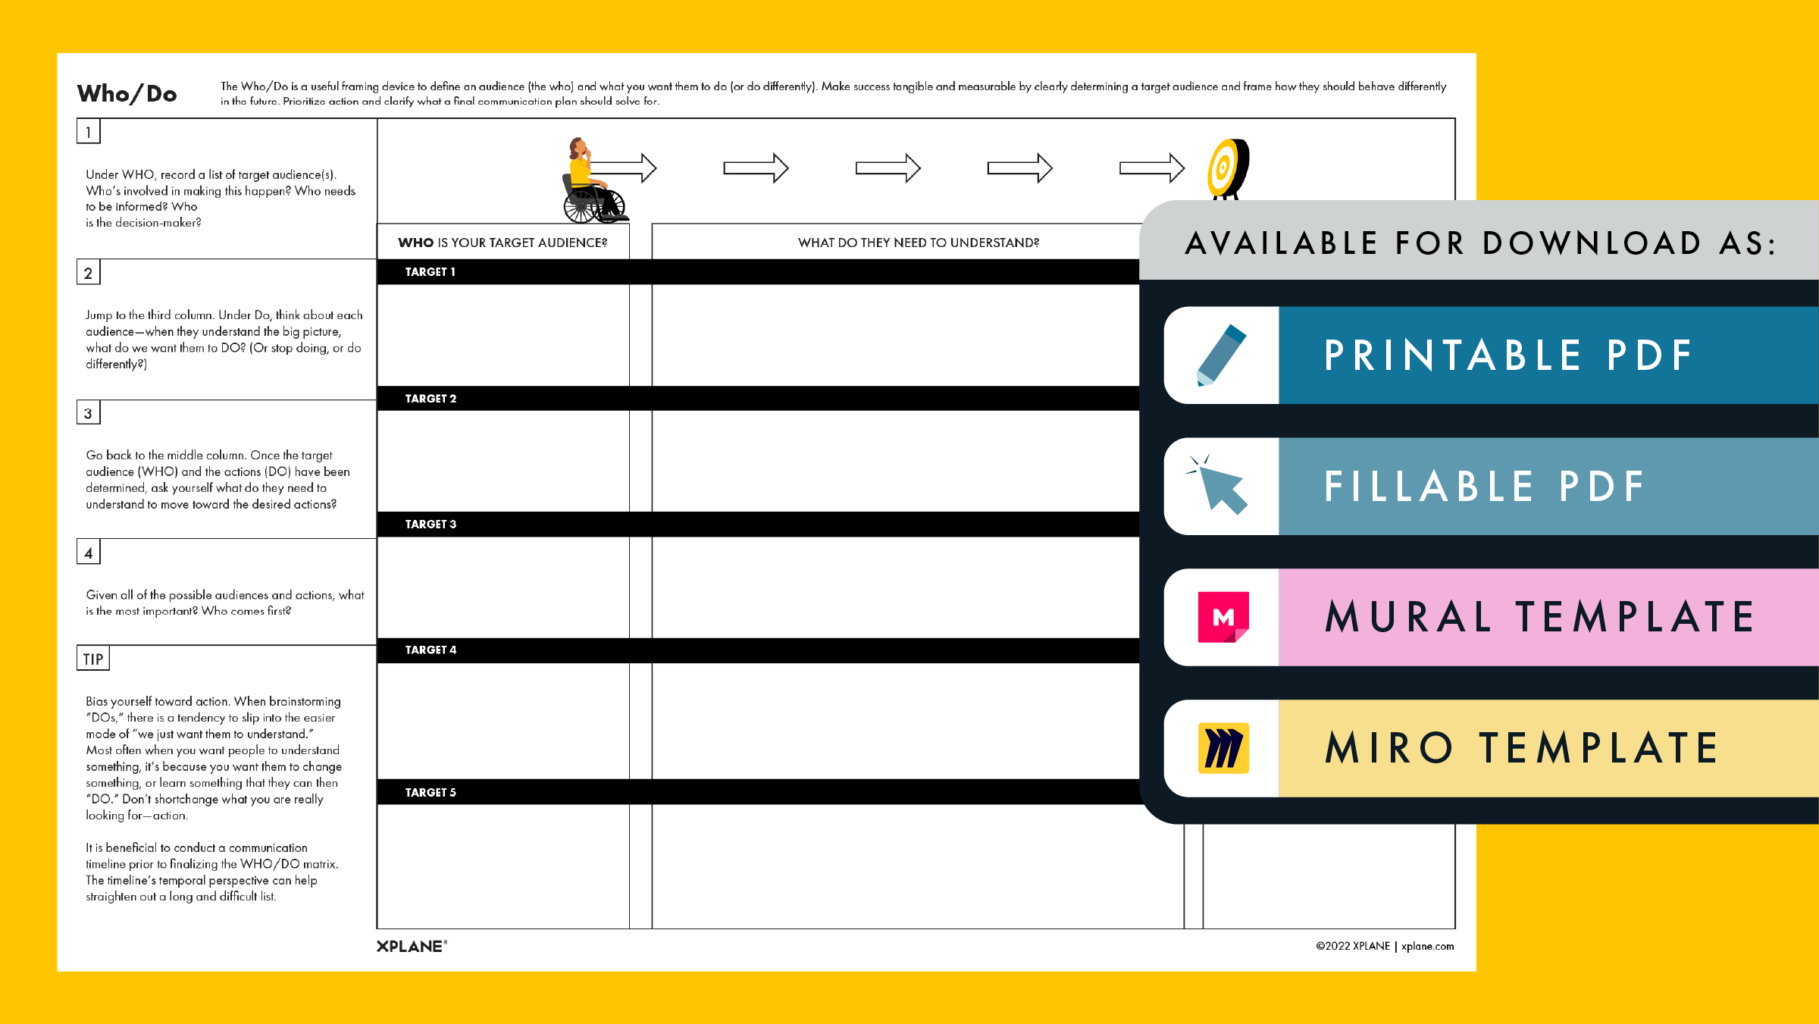 Who/Do worksheet against a yellow background. Four tabs under the header "AVAILABLE FOR DOWNLOAD AS" indicate available file types available.